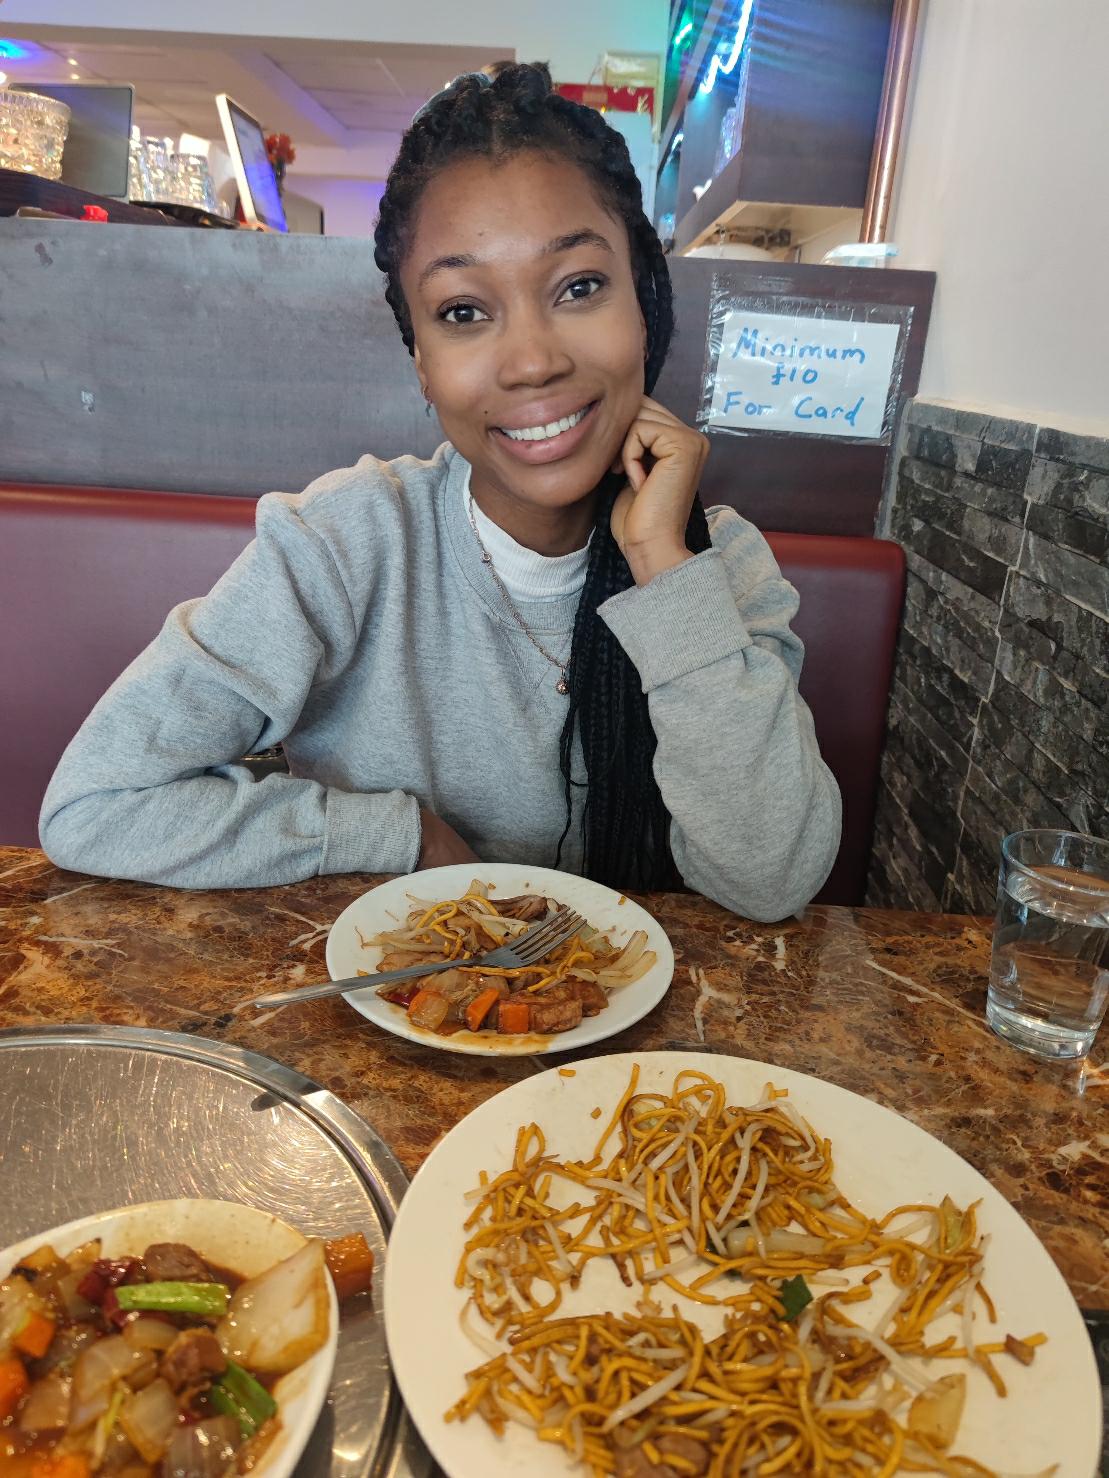 A person smiling with three bowls of food and a glass of water on a table